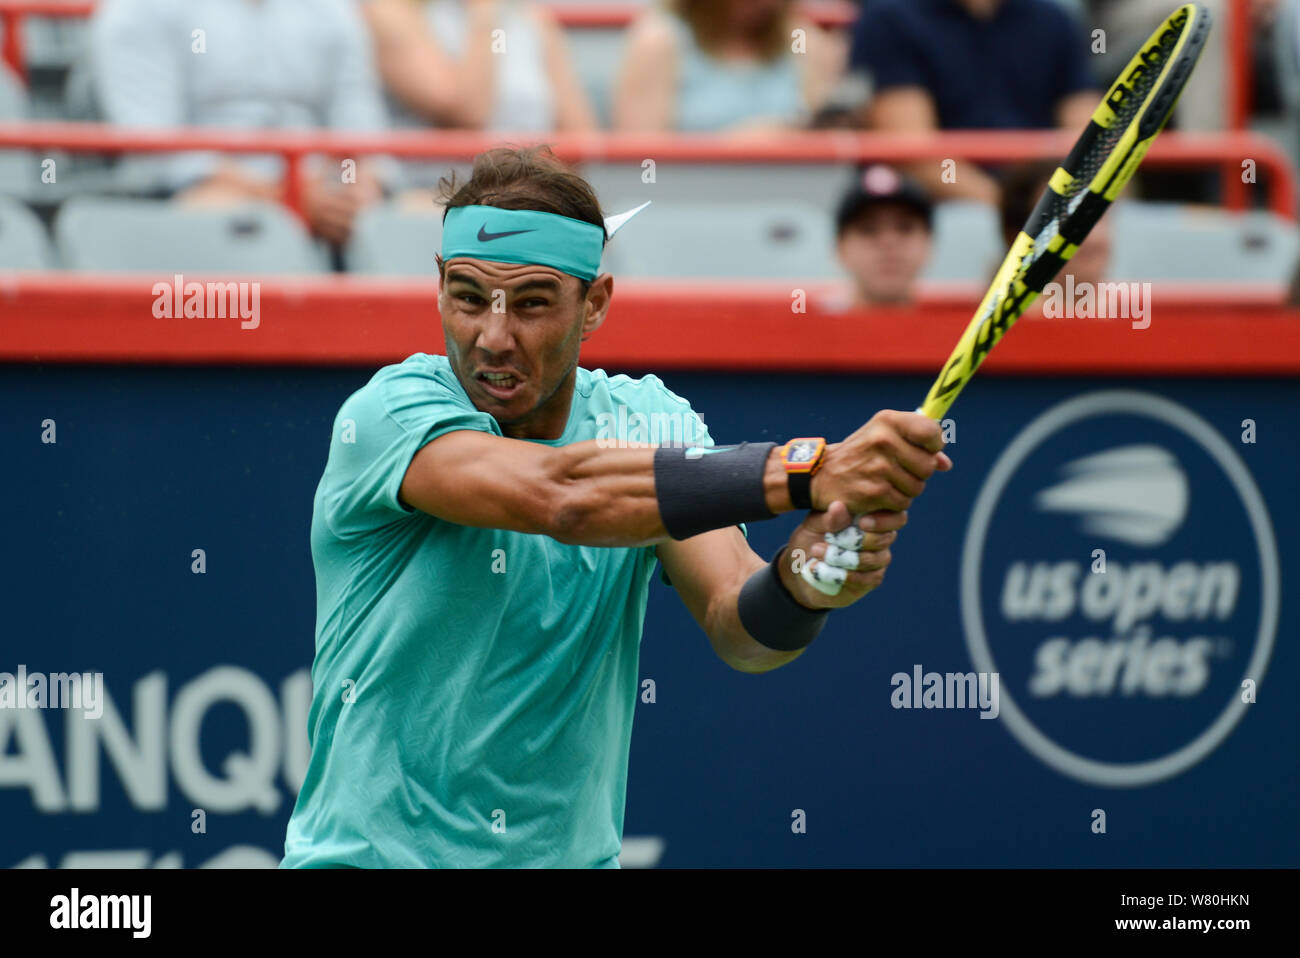 Montreal, Quebec, Canada. 7th Aug, 2019. RAFAEL NADAL of Spain in his match v